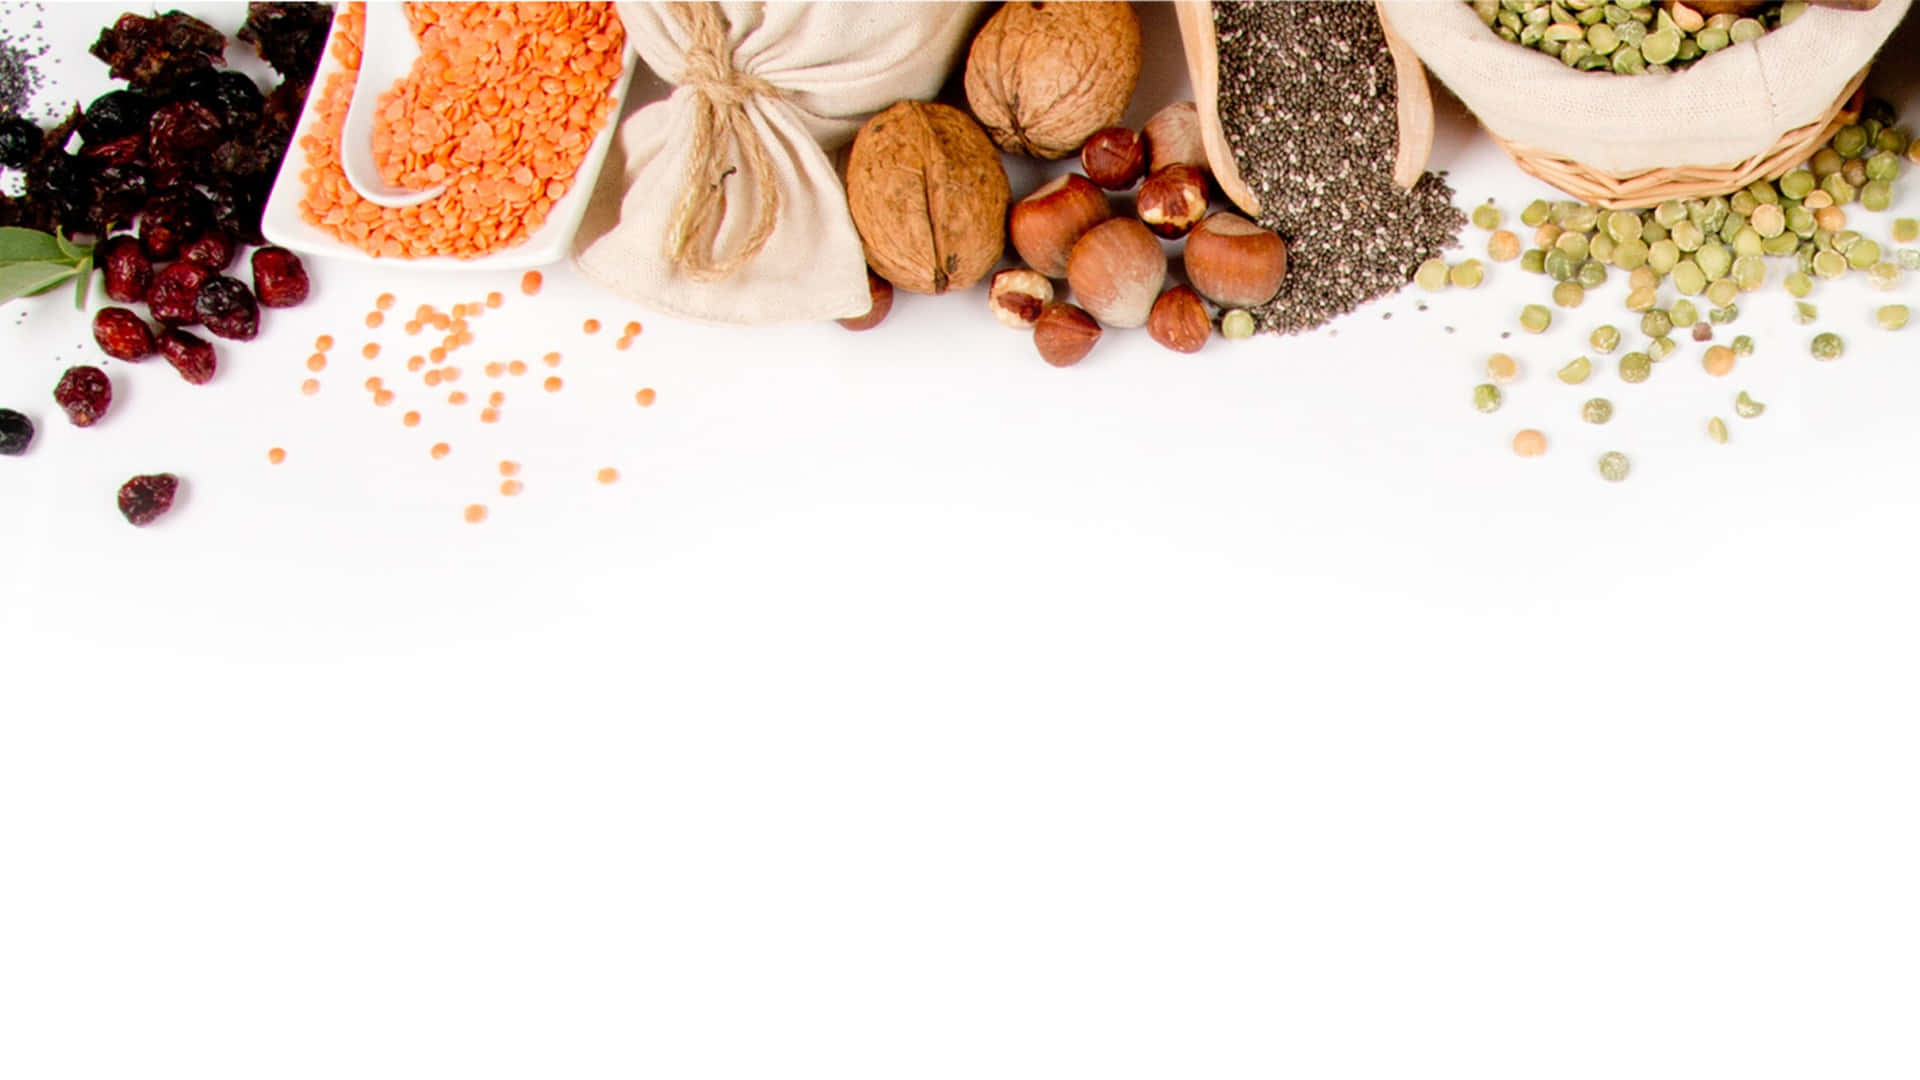 Essential Cooking Spices On White Surface Wallpaper